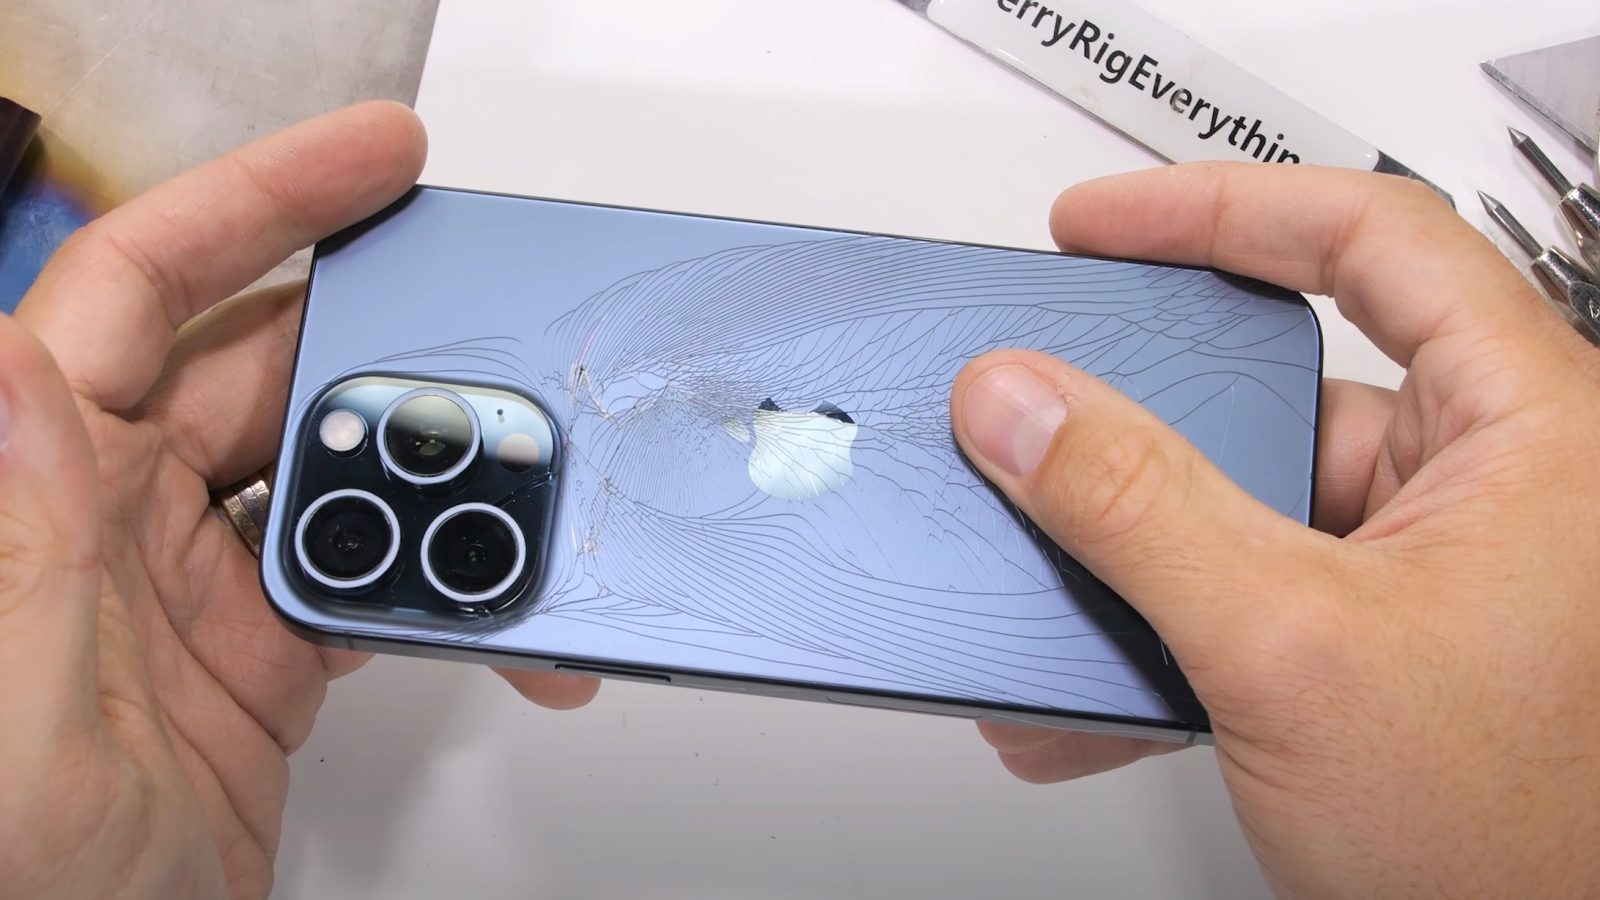 iPhone 15 Pro Max back glass cracks within seconds in new durability test  [Video] - 9to5Mac